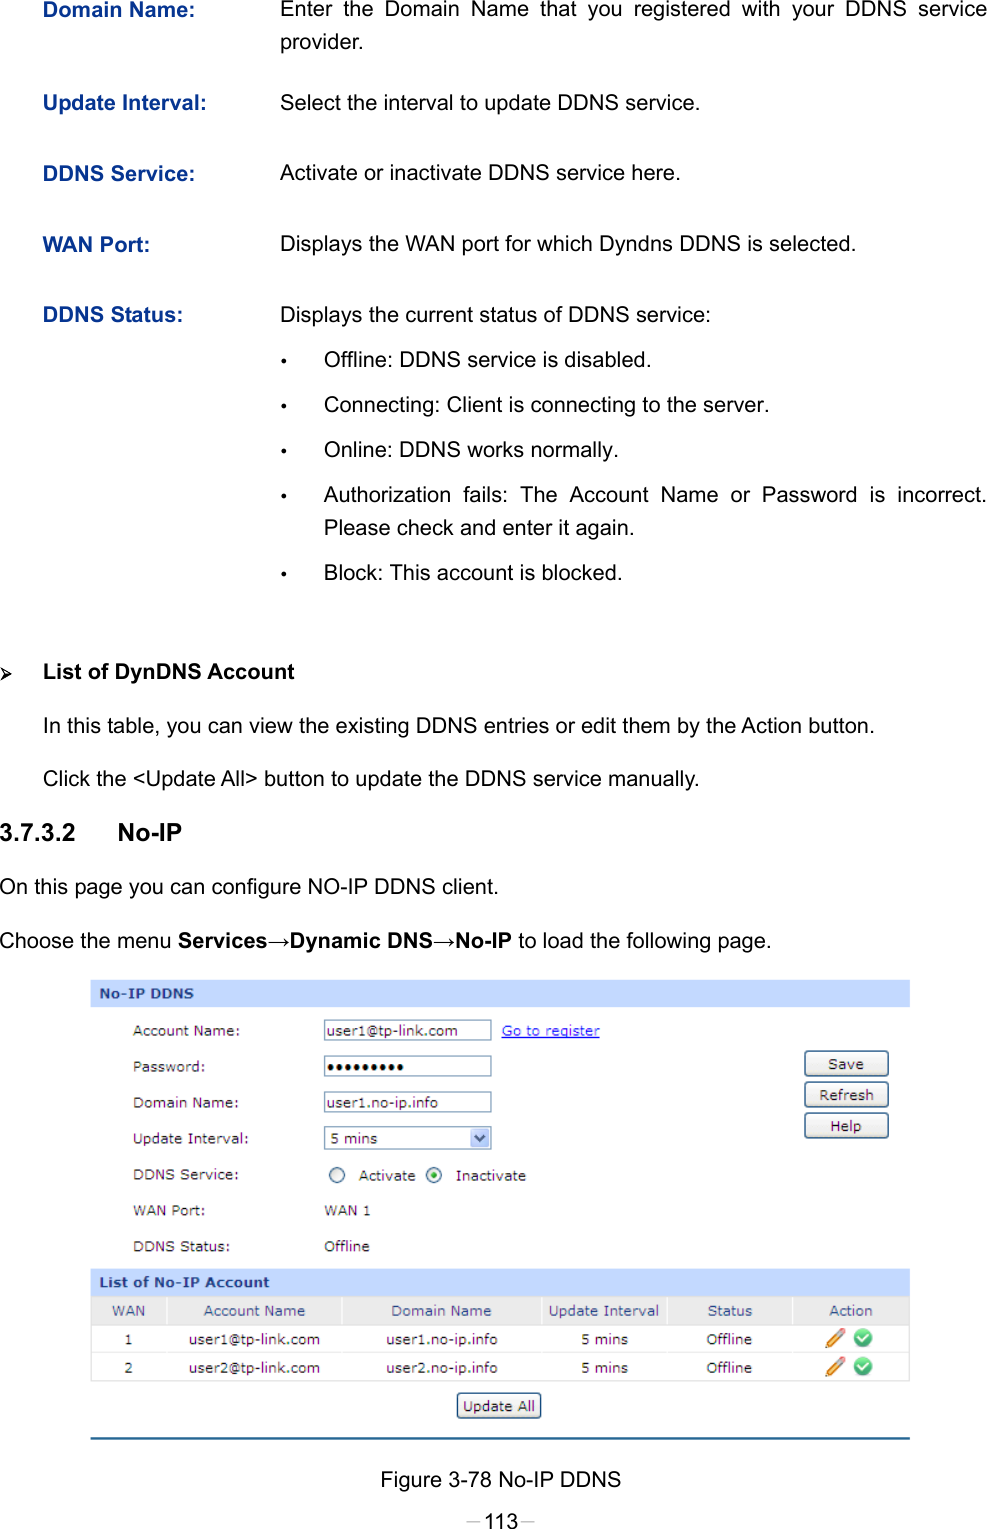  Domain Name: Enter the Domain Name that you registered with your DDNS service provider. Update Interval: Select the interval to update DDNS service. DDNS Service: Activate or inactivate DDNS service here. WAN Port: Displays the WAN port for which Dyndns DDNS is selected. DDNS Status: Displays the current status of DDNS service:  Offline: DDNS service is disabled.  Connecting: Client is connecting to the server.  Online: DDNS works normally.  Authorization fails: The Account Name or Password is incorrect. Please check and enter it again.  Block: This account is blocked.  List of DynDNS Account In this table, you can view the existing DDNS entries or edit them by the Action button. Click the &lt;Update All&gt; button to update the DDNS service manually. 3.7.3.2 No-IP On this page you can configure NO-IP DDNS client. Choose the menu Services→Dynamic DNS→No-IP to load the following page.  Figure 3-78 No-IP DDNS -113- 